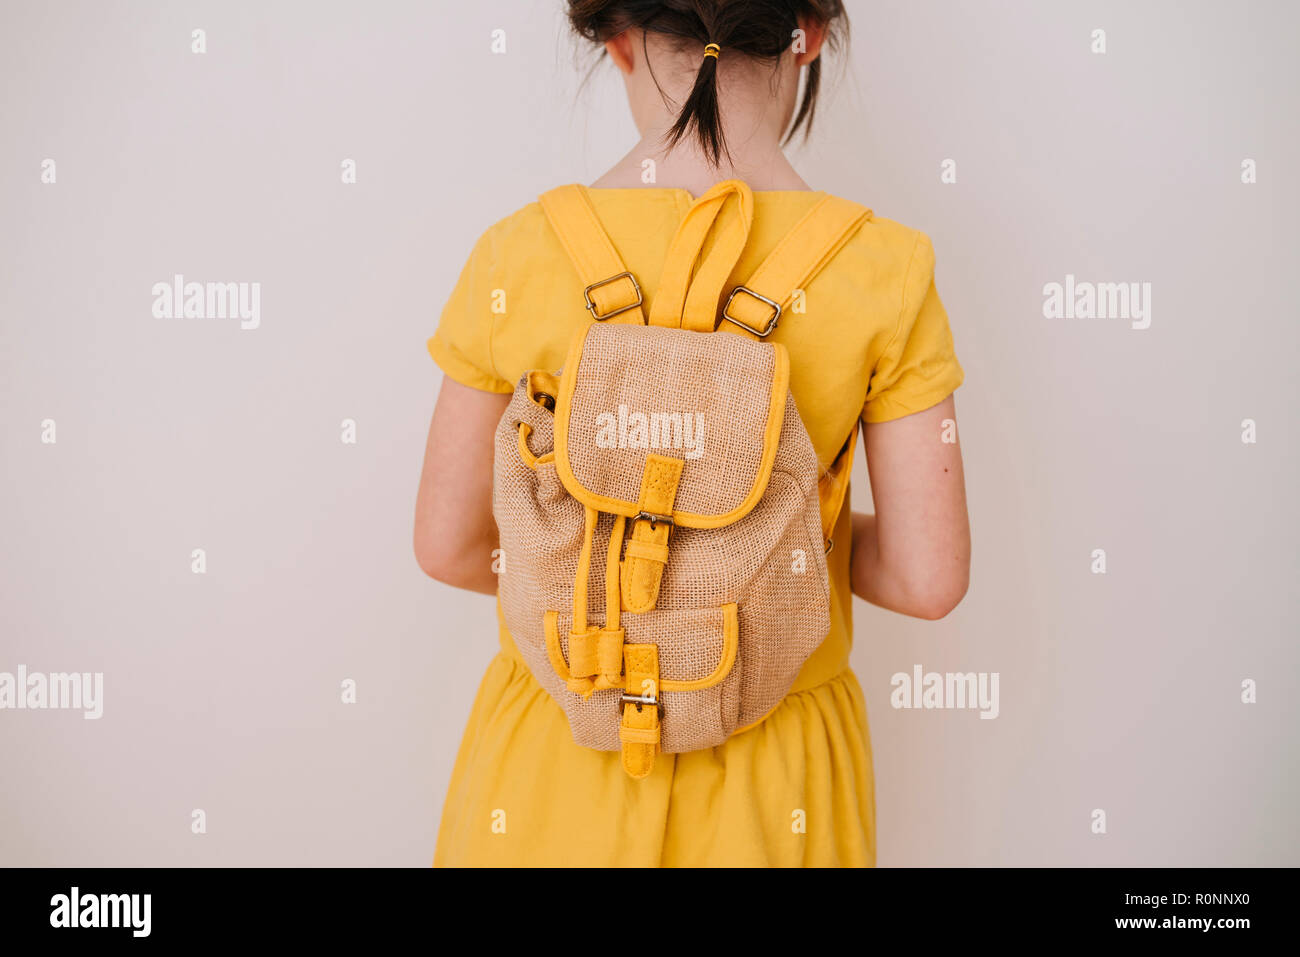 Rear view of a girl wearing a backpack Stock Photo